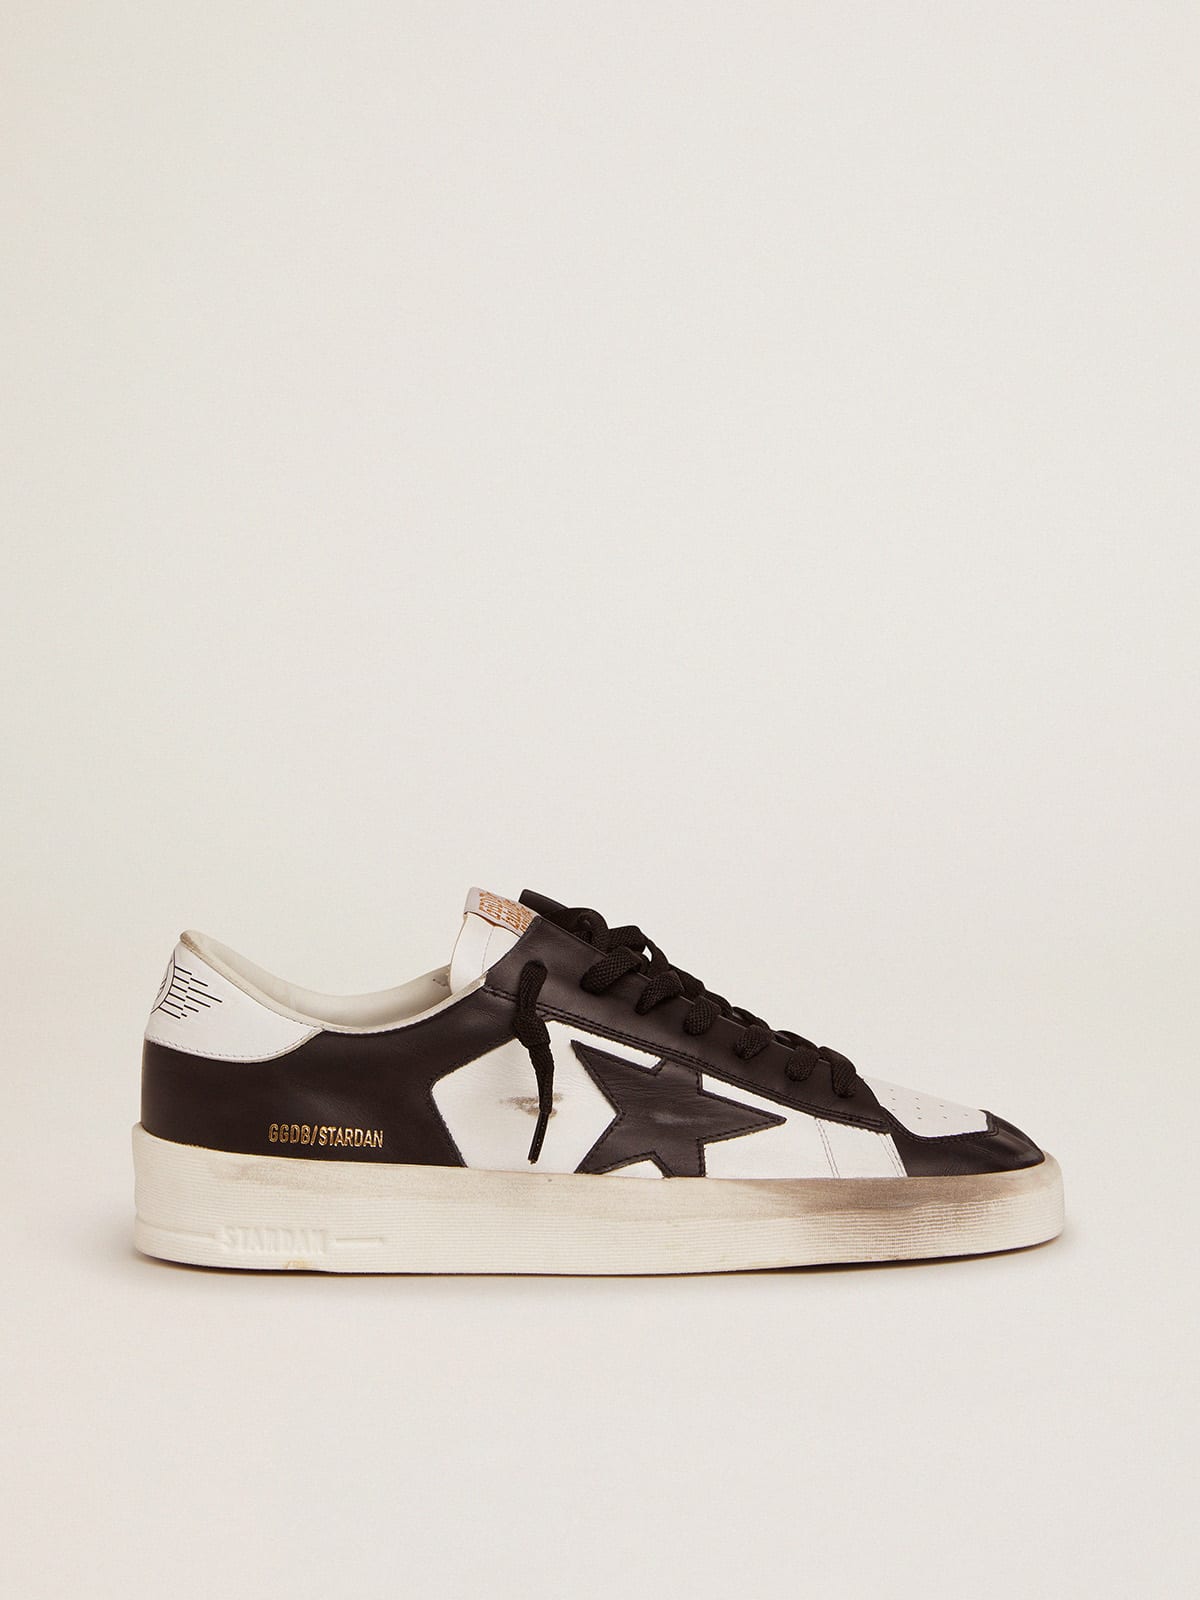 Men's Stardan sneakers in black and white leather